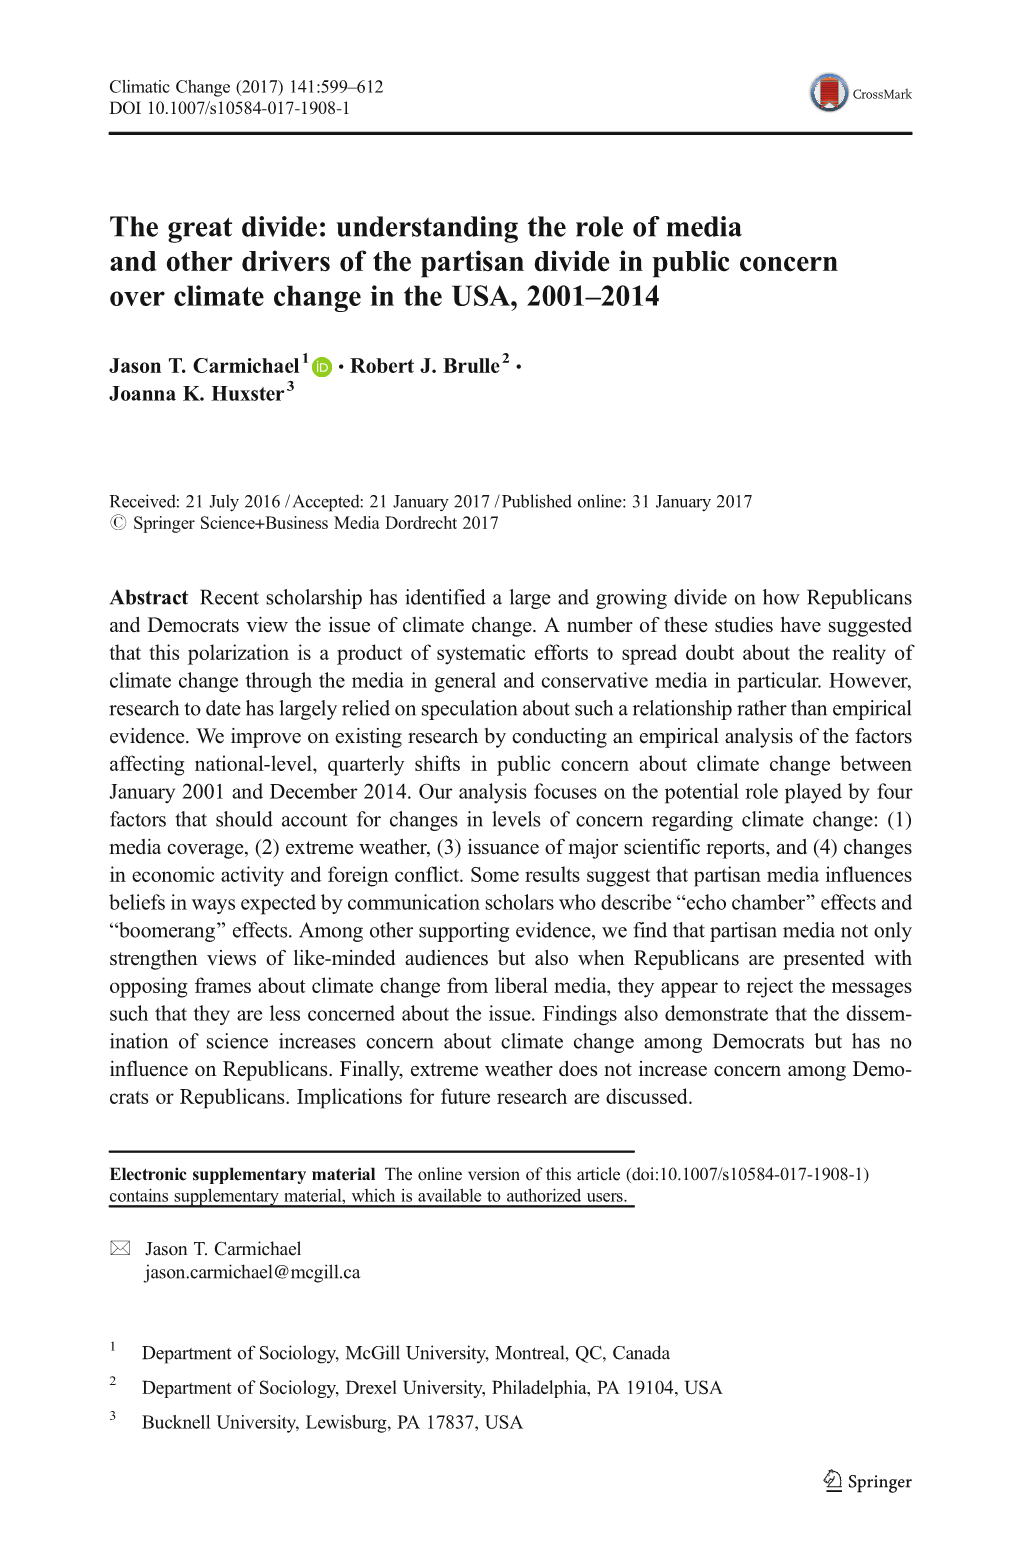 The Great Divide: Understanding the Role of Media and Other Drivers of the Partisan Divide in Public Concern Over Climate Change in the USA, 2001–2014